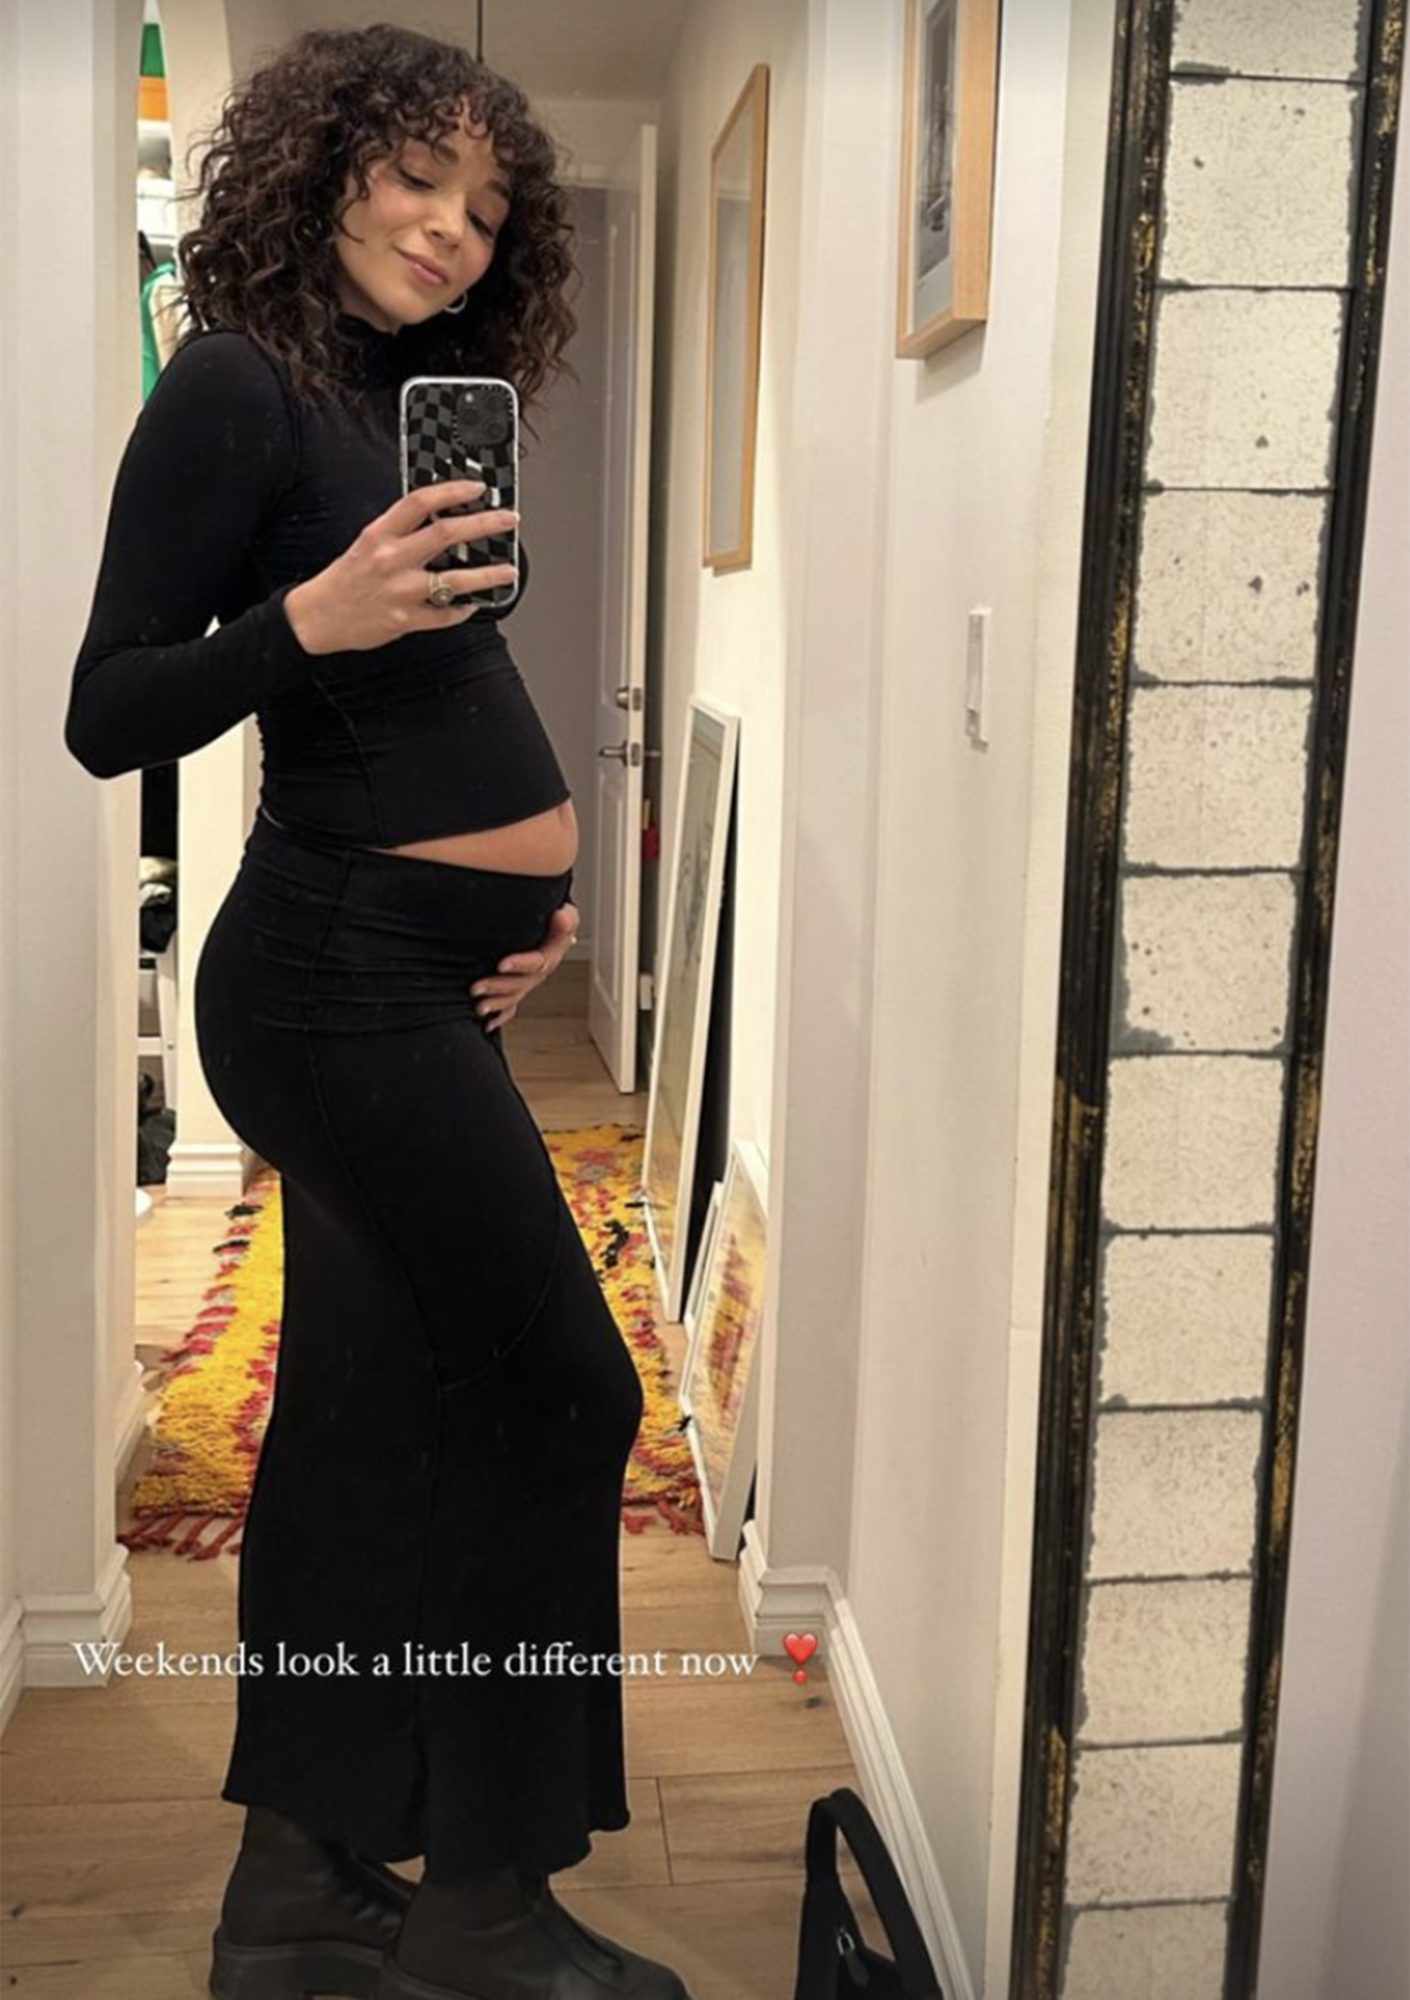 Ashley Madekwe Is Pregnant, Expecting First Baby with Husband Iddo Goldberg